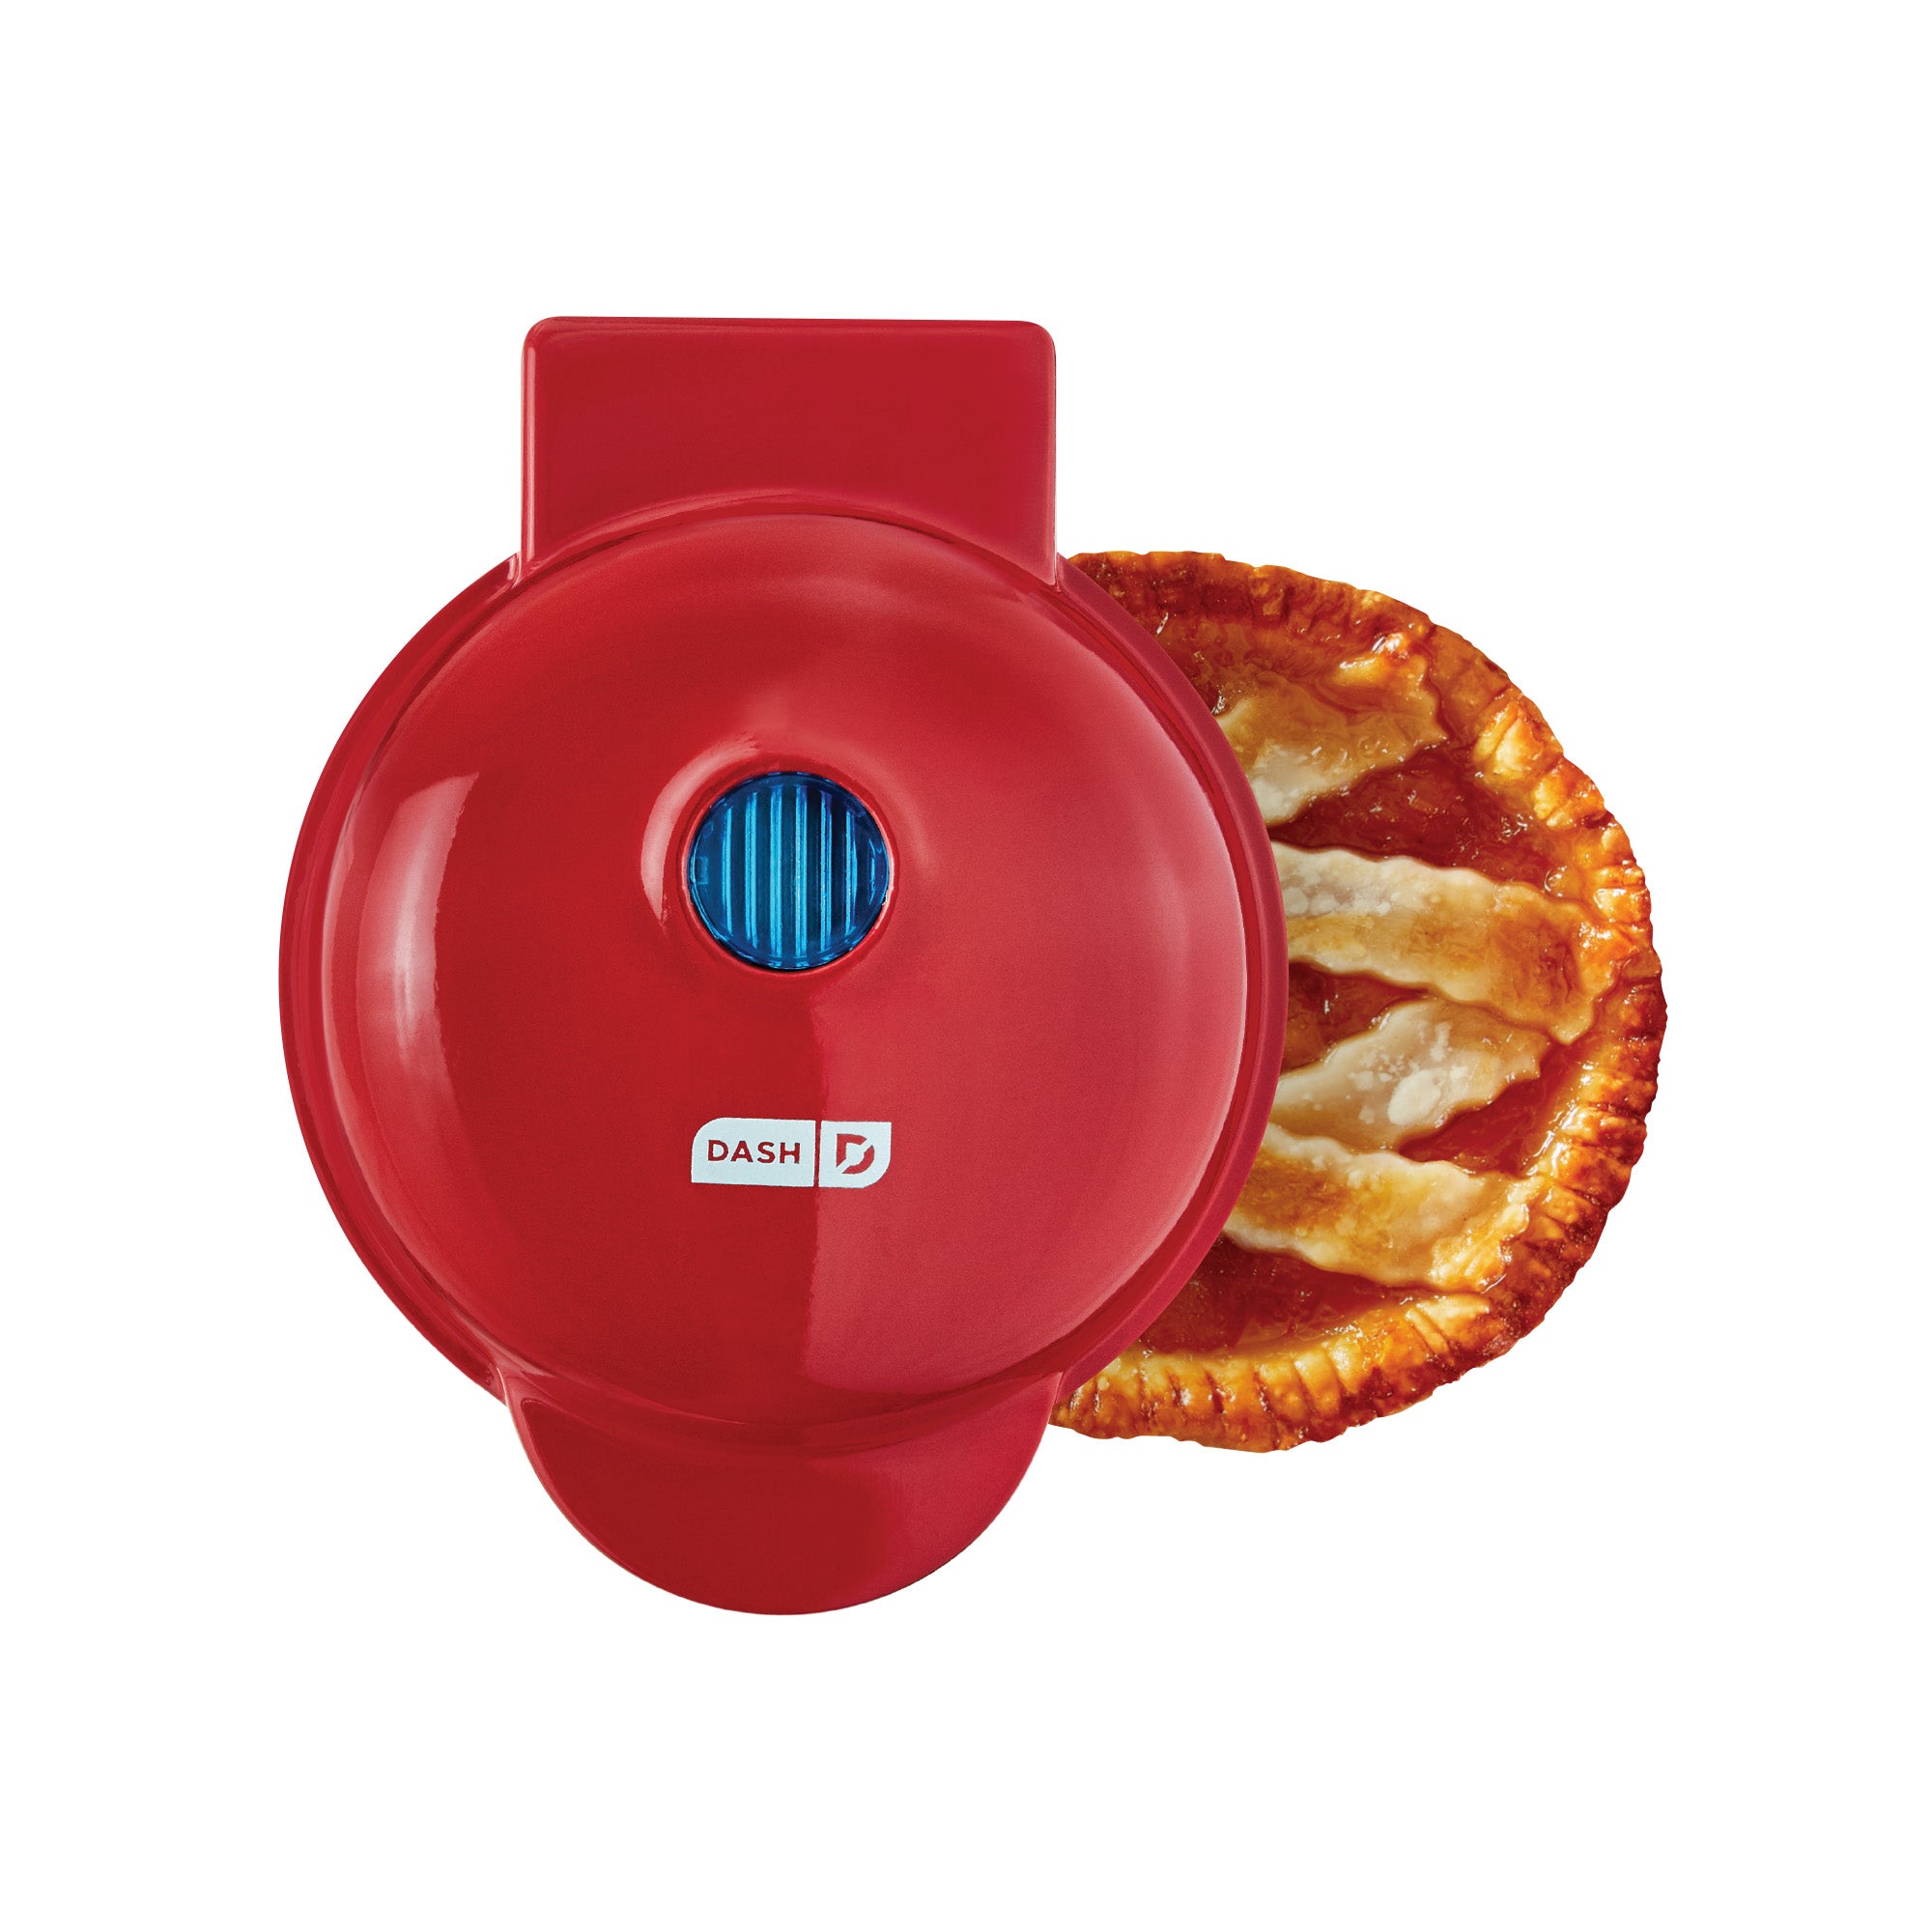 Mini Pie and Quiche Maker- Pie Baker Cooks 6 Small Pies and Quiches in Minutes